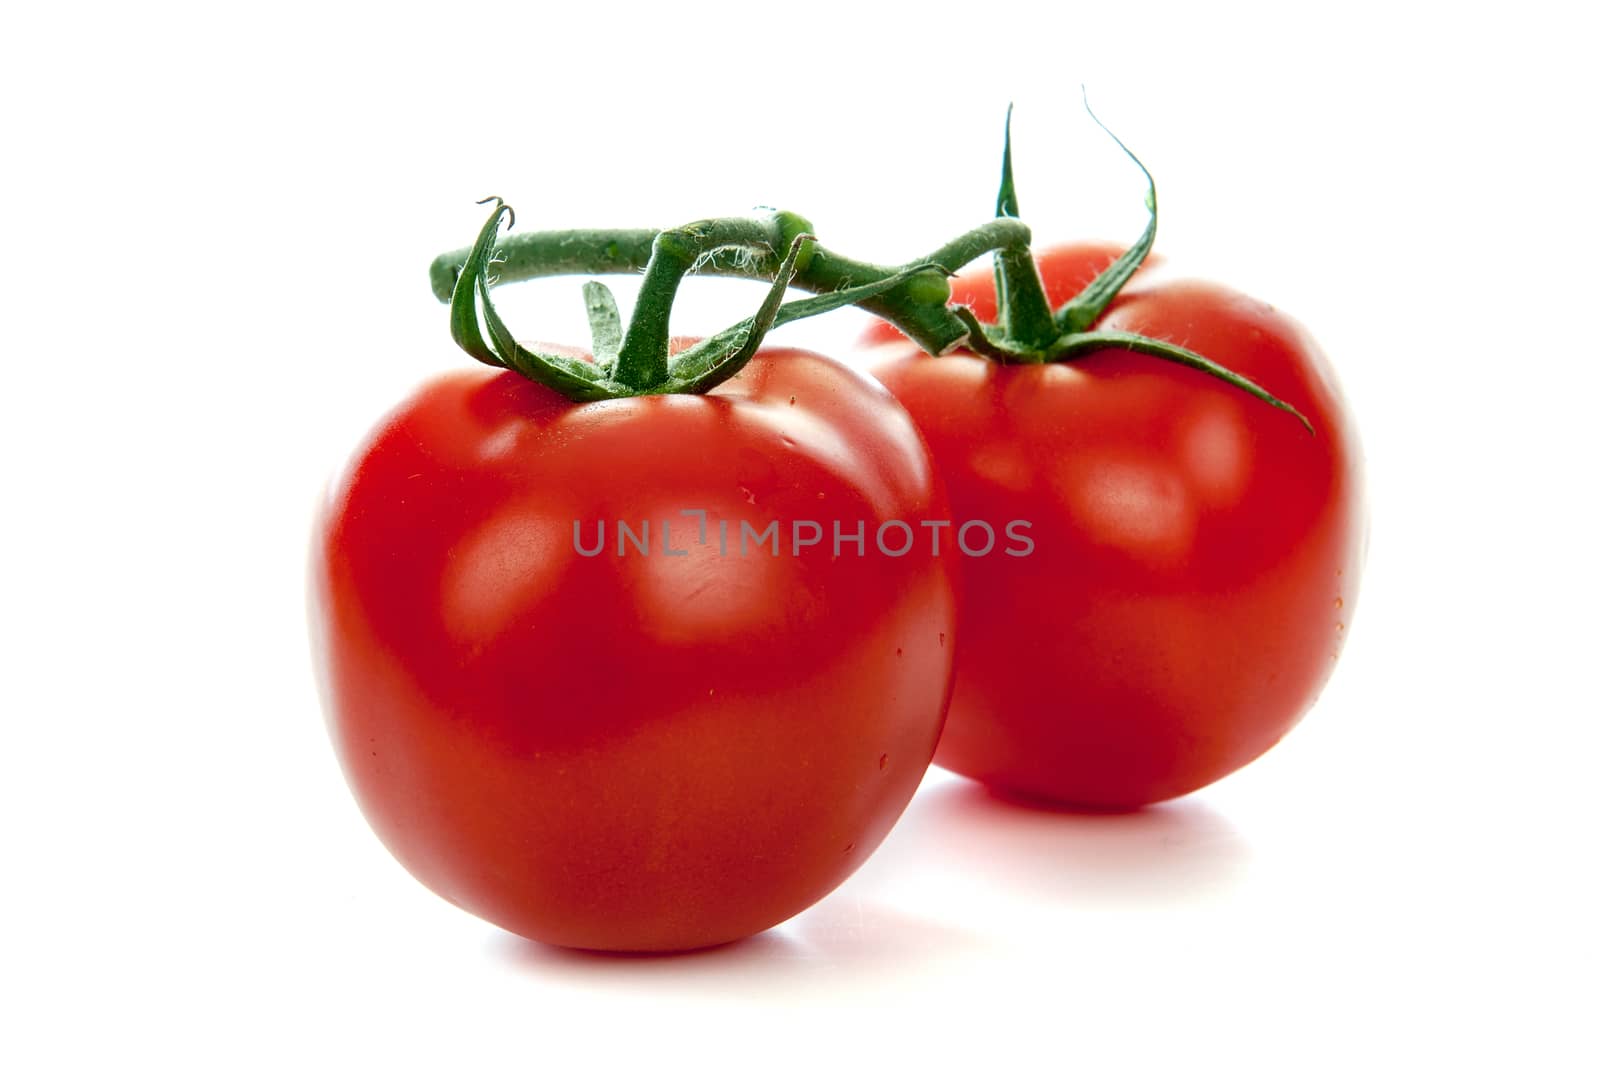 Two tomatoes on a white background